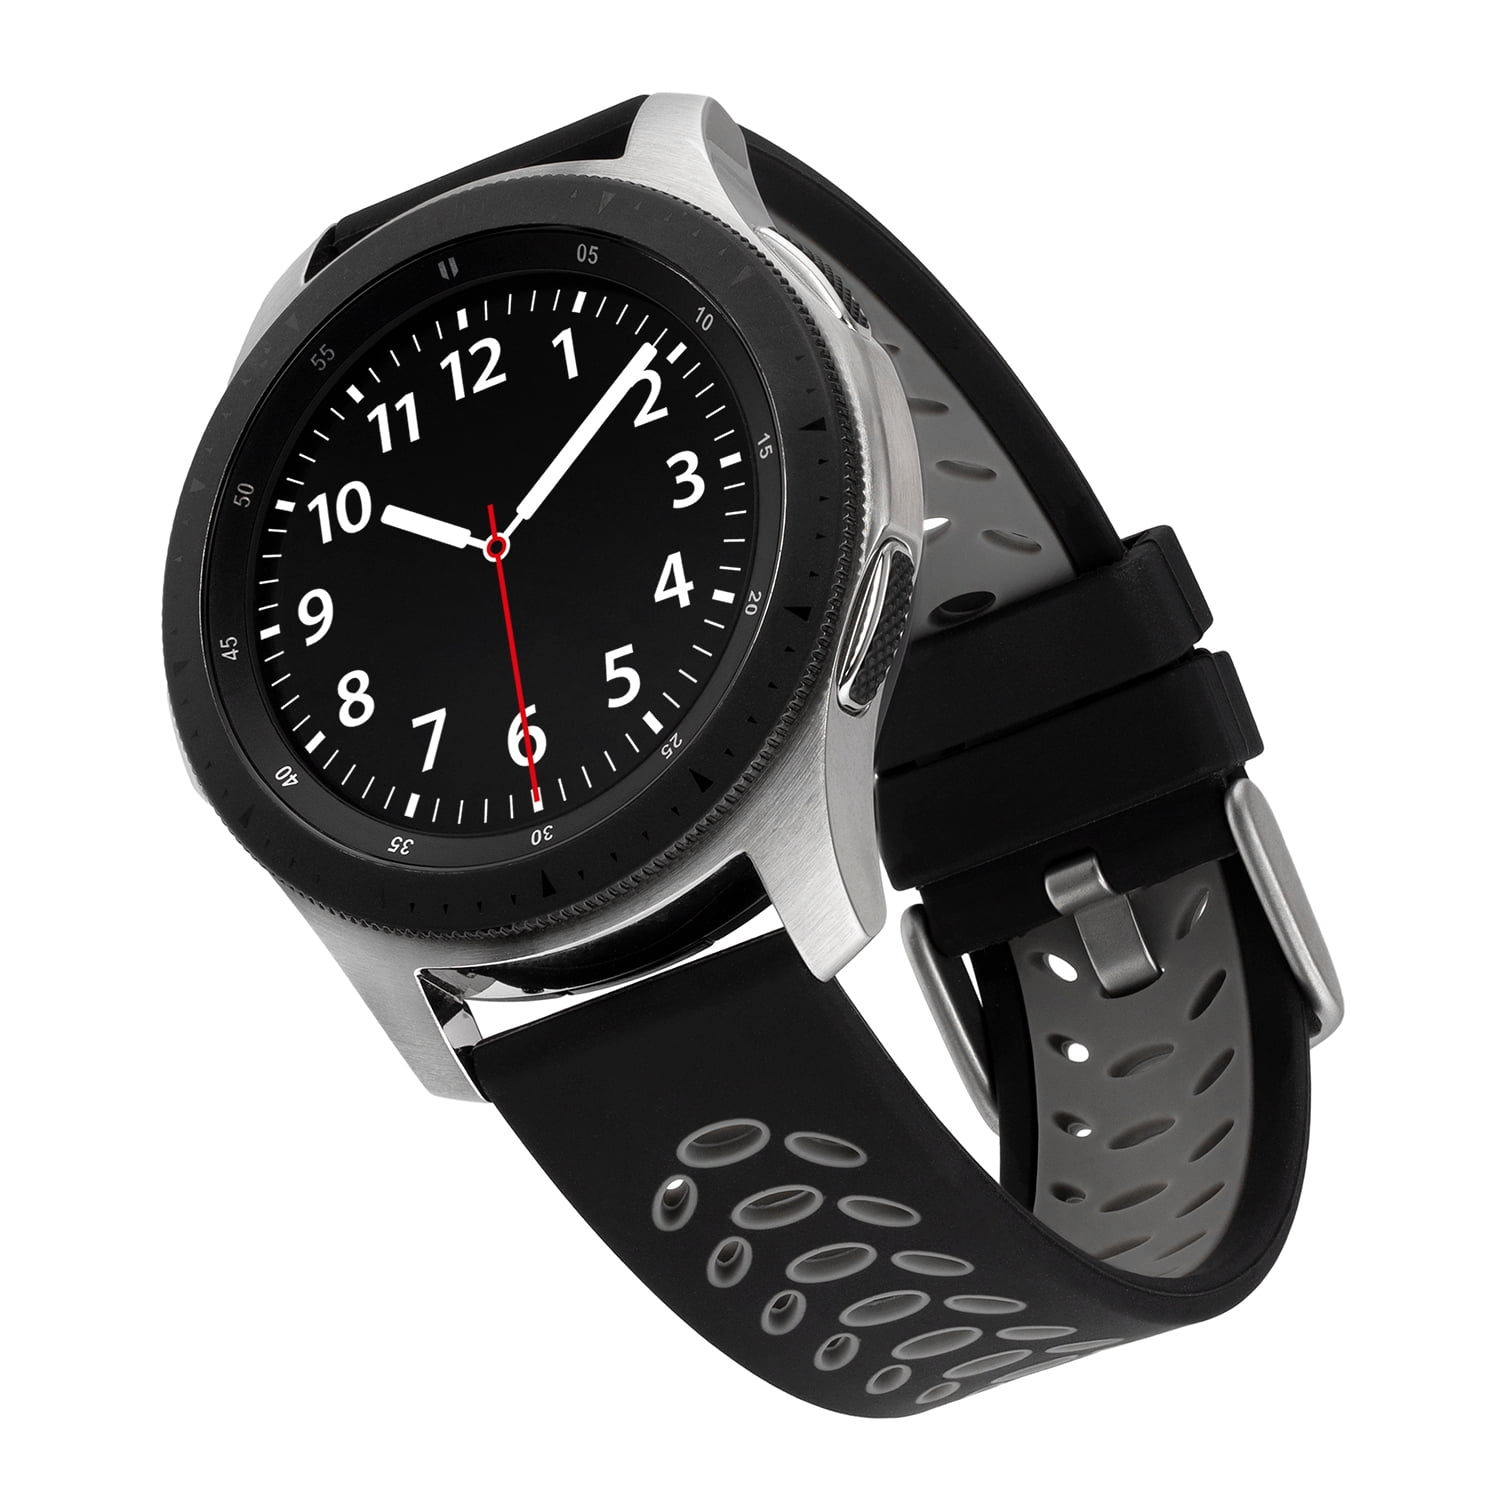 WITHit Black/Gray Silicone Sport Band for 20mm Samsung Universal Watch